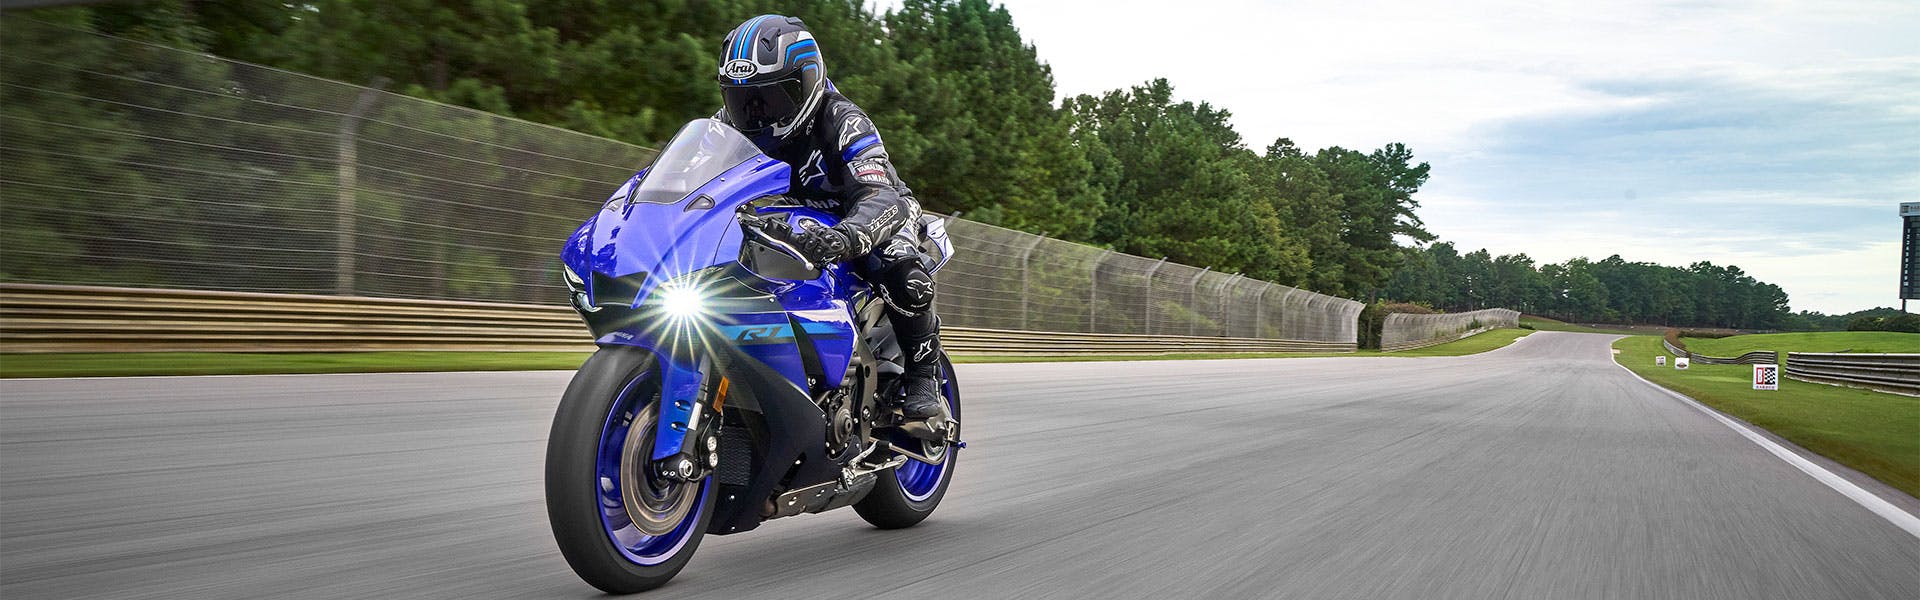 Yamaha YZF-R1 in icon blue colour on the road